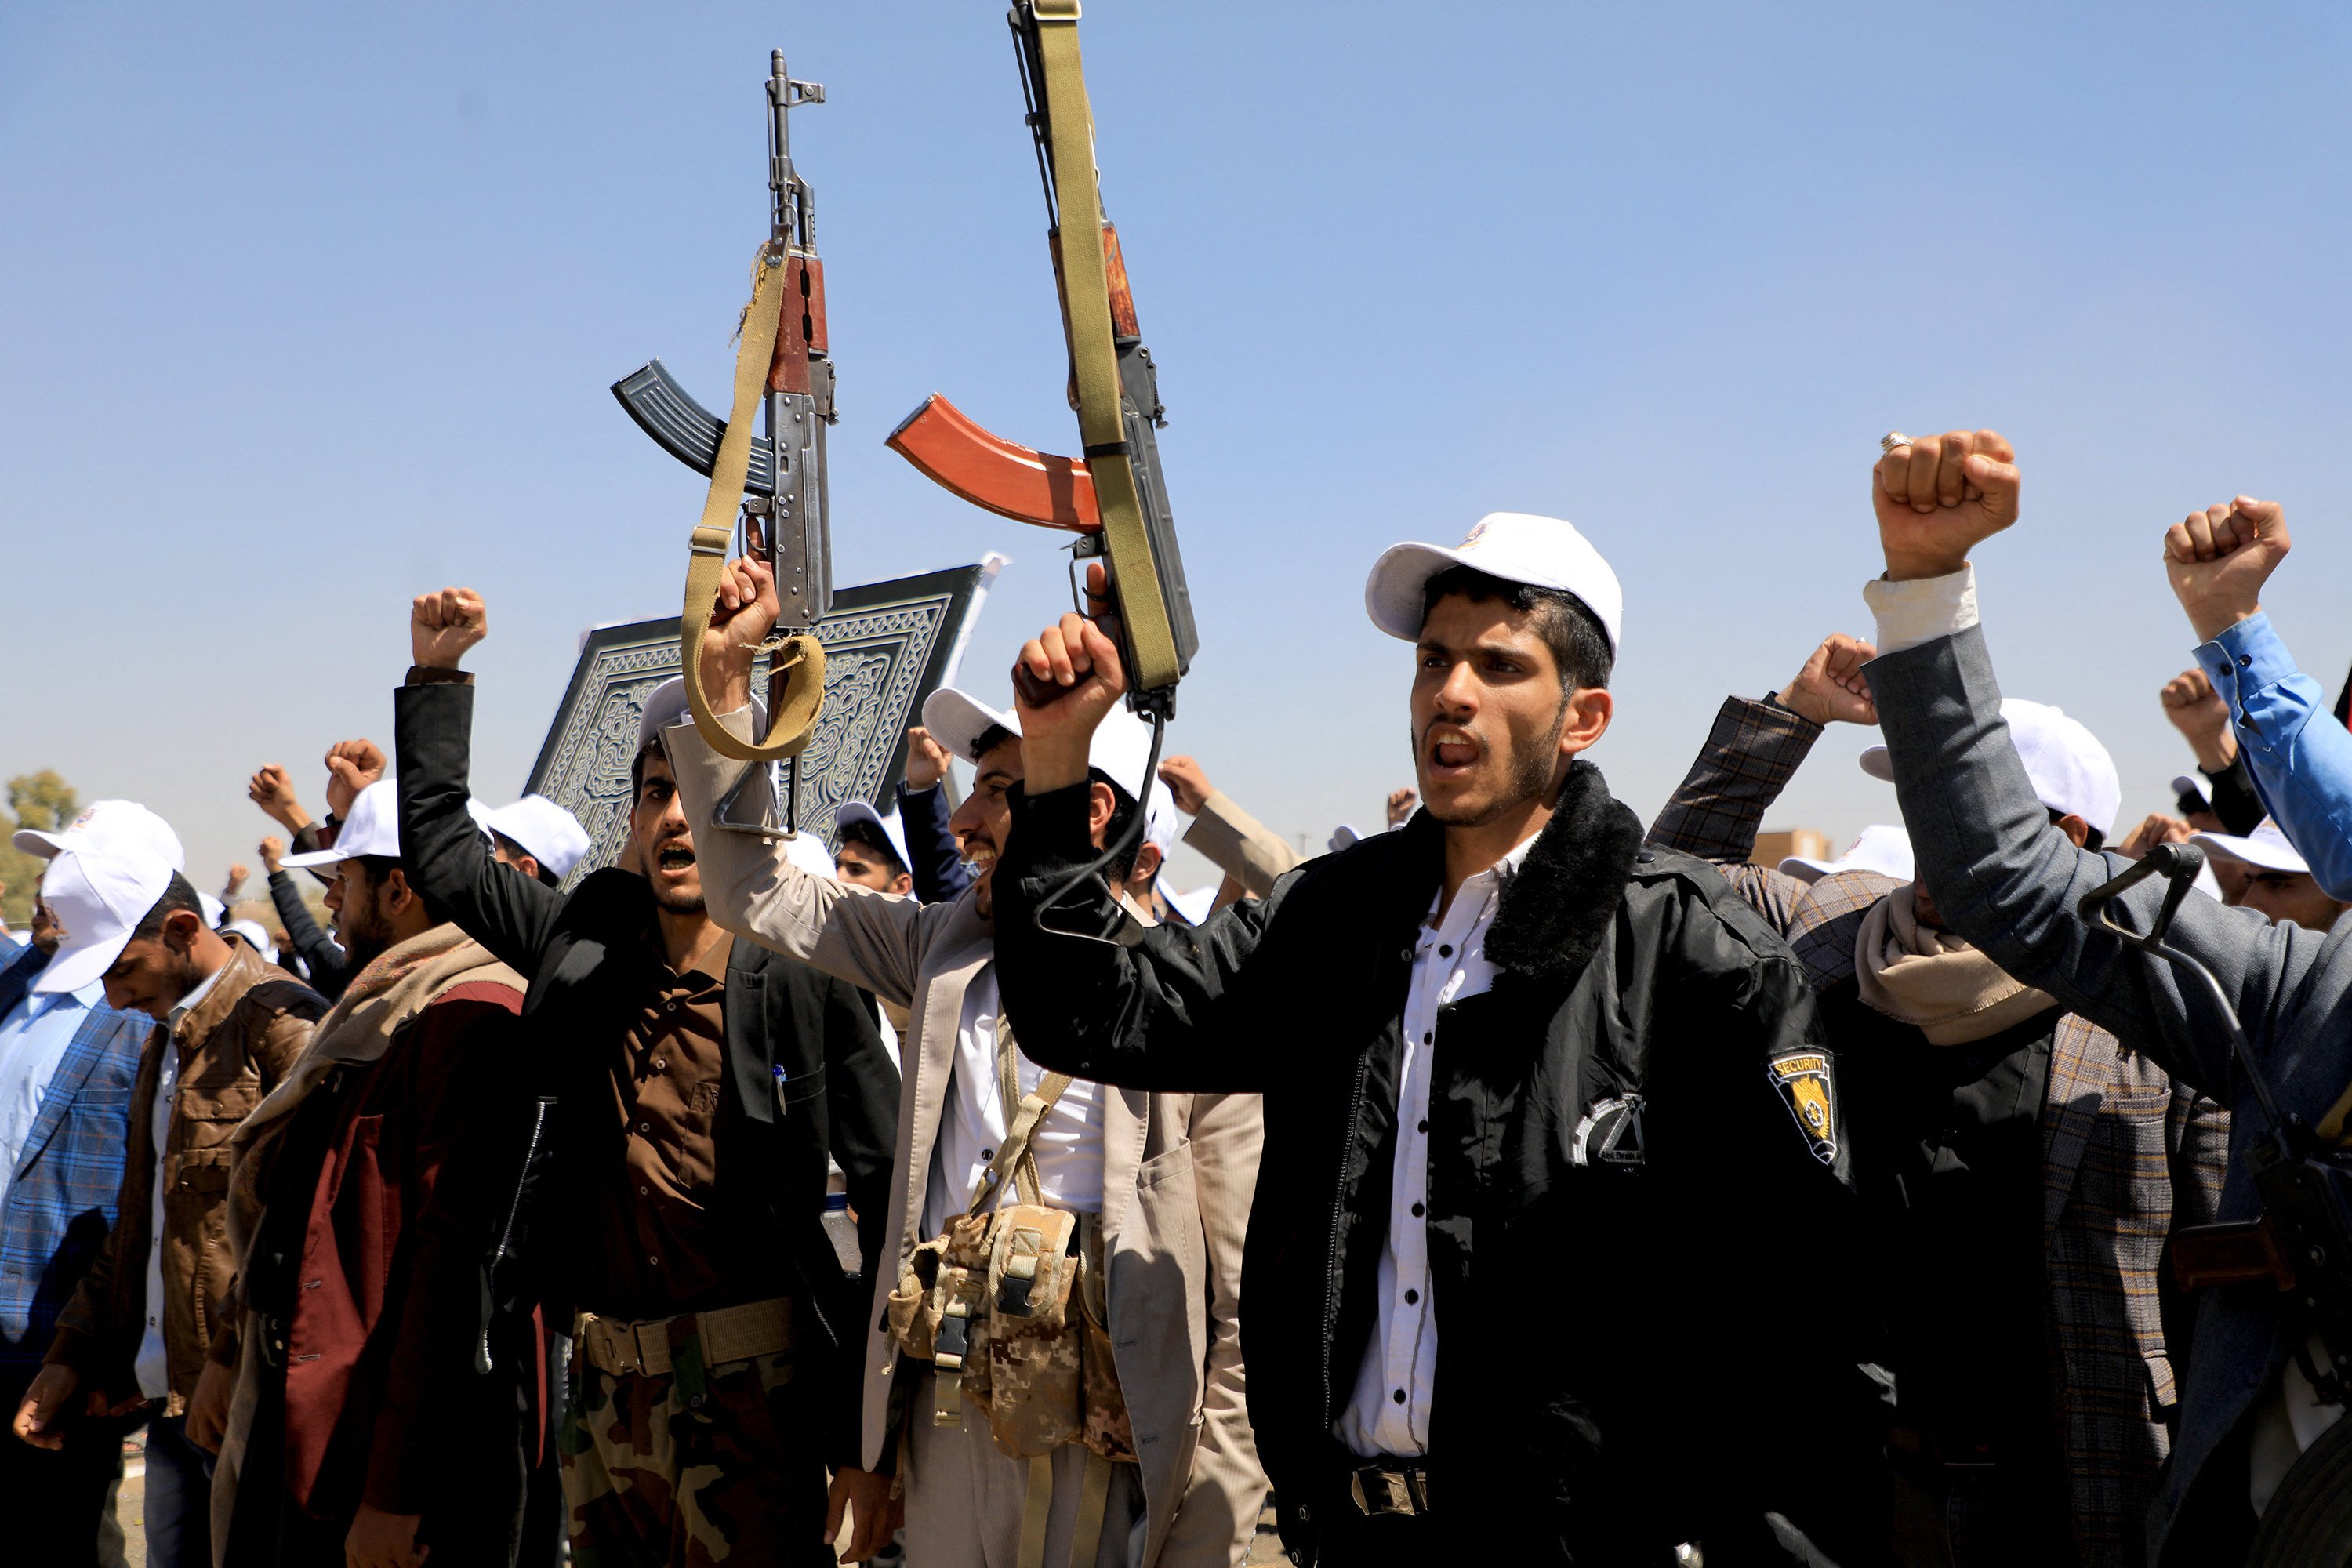 Students recruited into the ranks of Yemen’s Houthi rebels hold up rifles as they shout slogans in support of the Palestinians and against the US, Britain and Israel during a rally in Sanaa on Wednesday. Photo: TNS